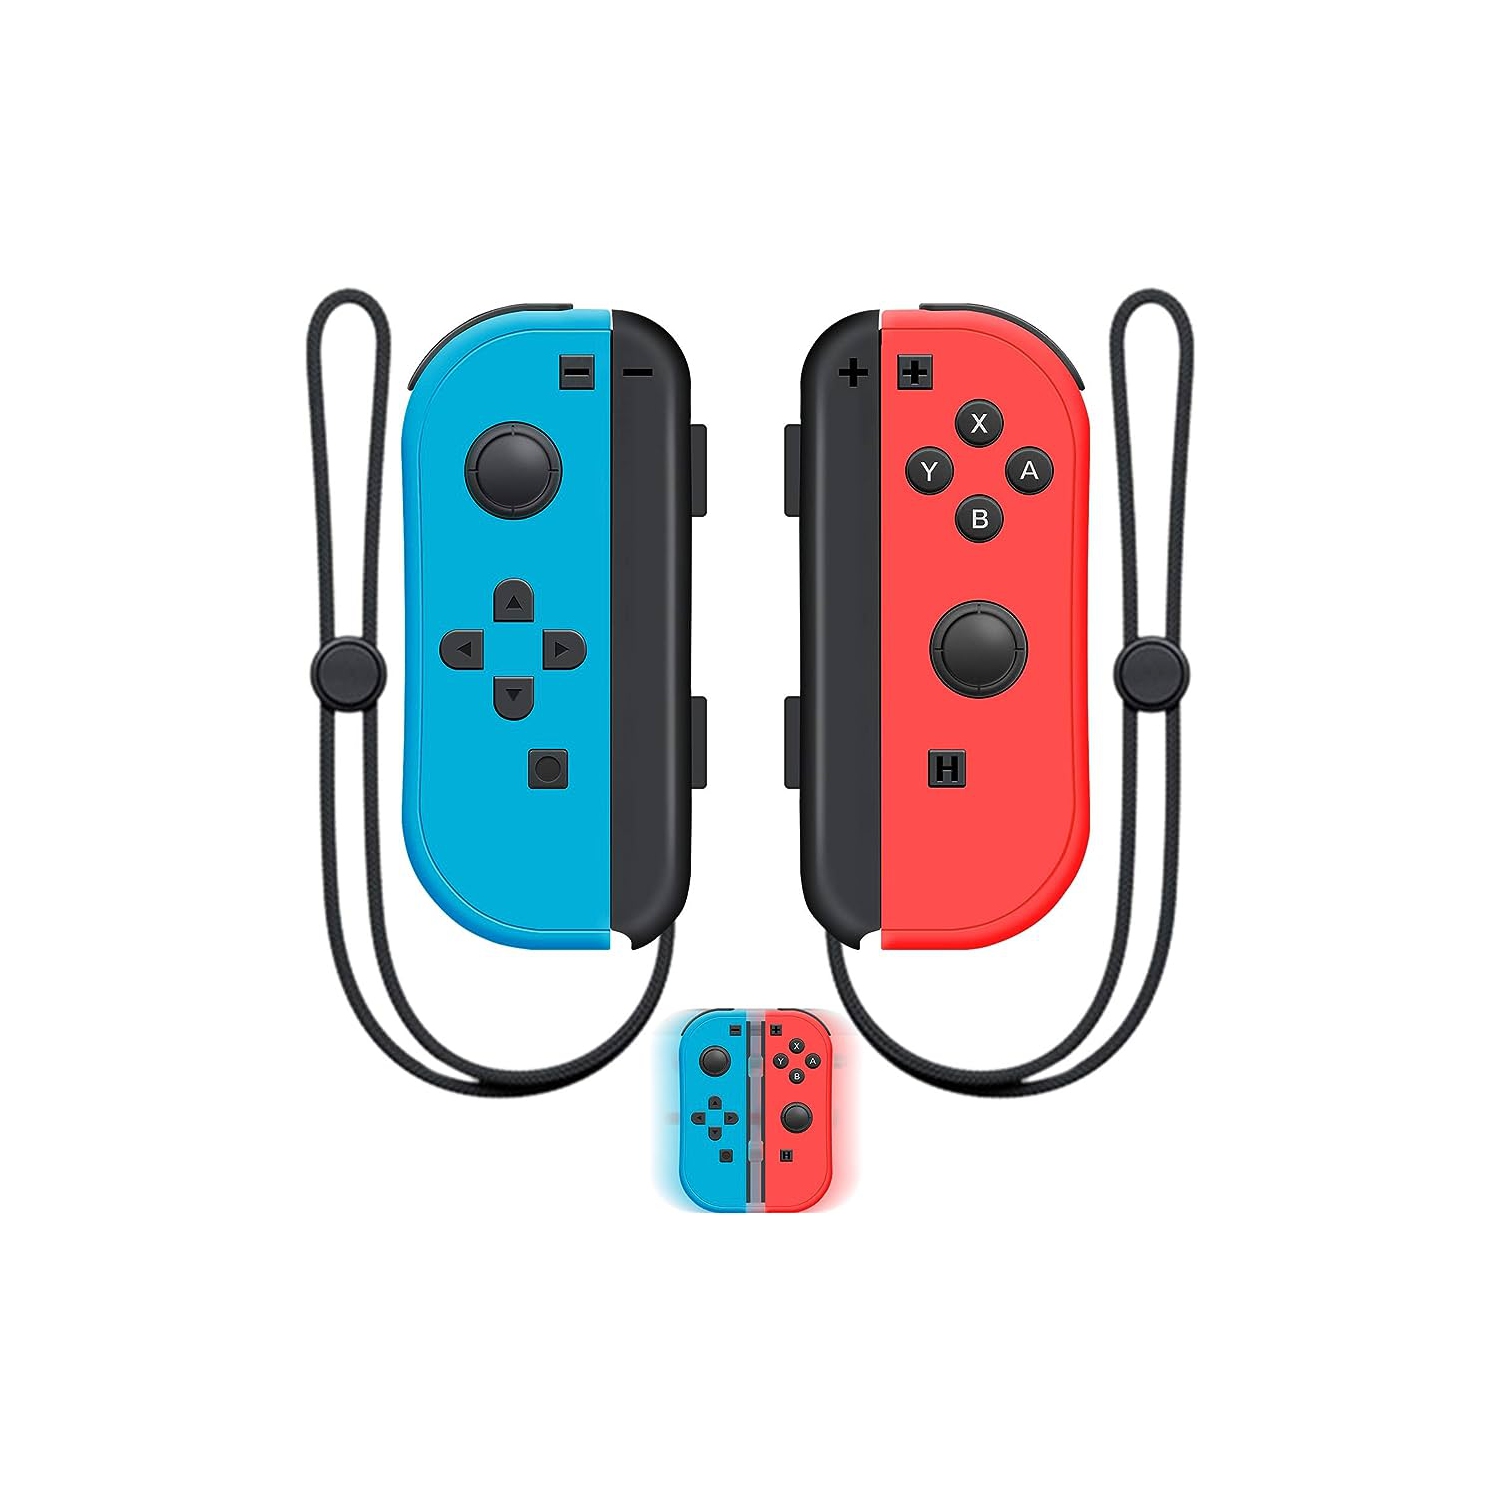 Refurbished (Good) Nintendo Switch Original Left and Right Joy-Con Controllers - Neon Red/Neon Blue